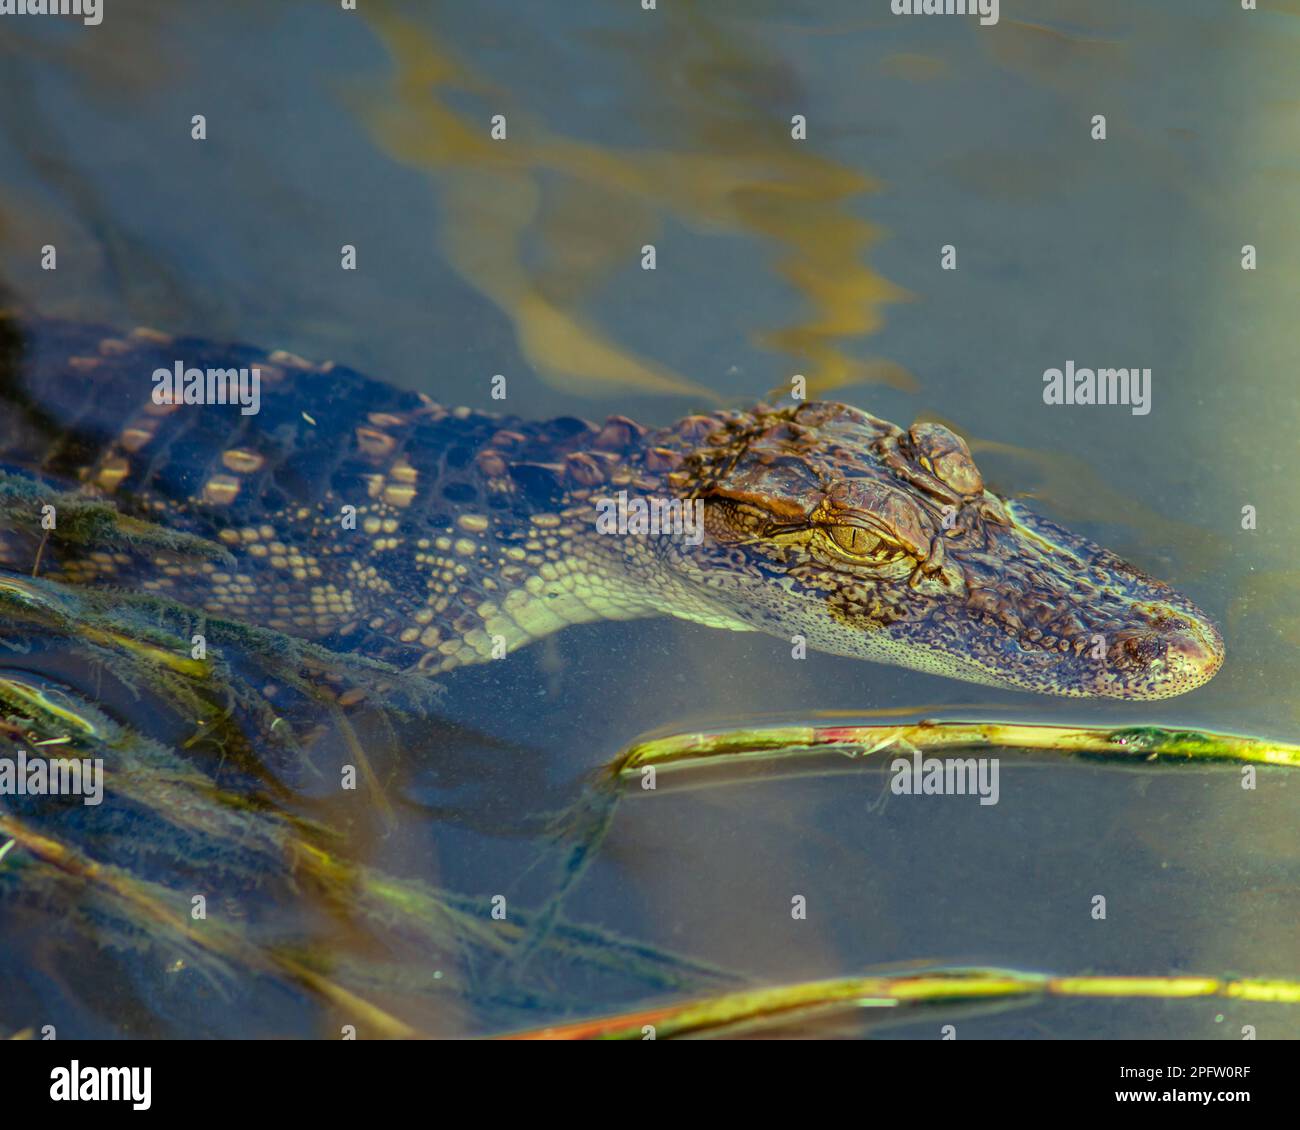 A young American Alligator (Alligator mississippiensis) seen at South Padre Island nature center, Texas. Stock Photo